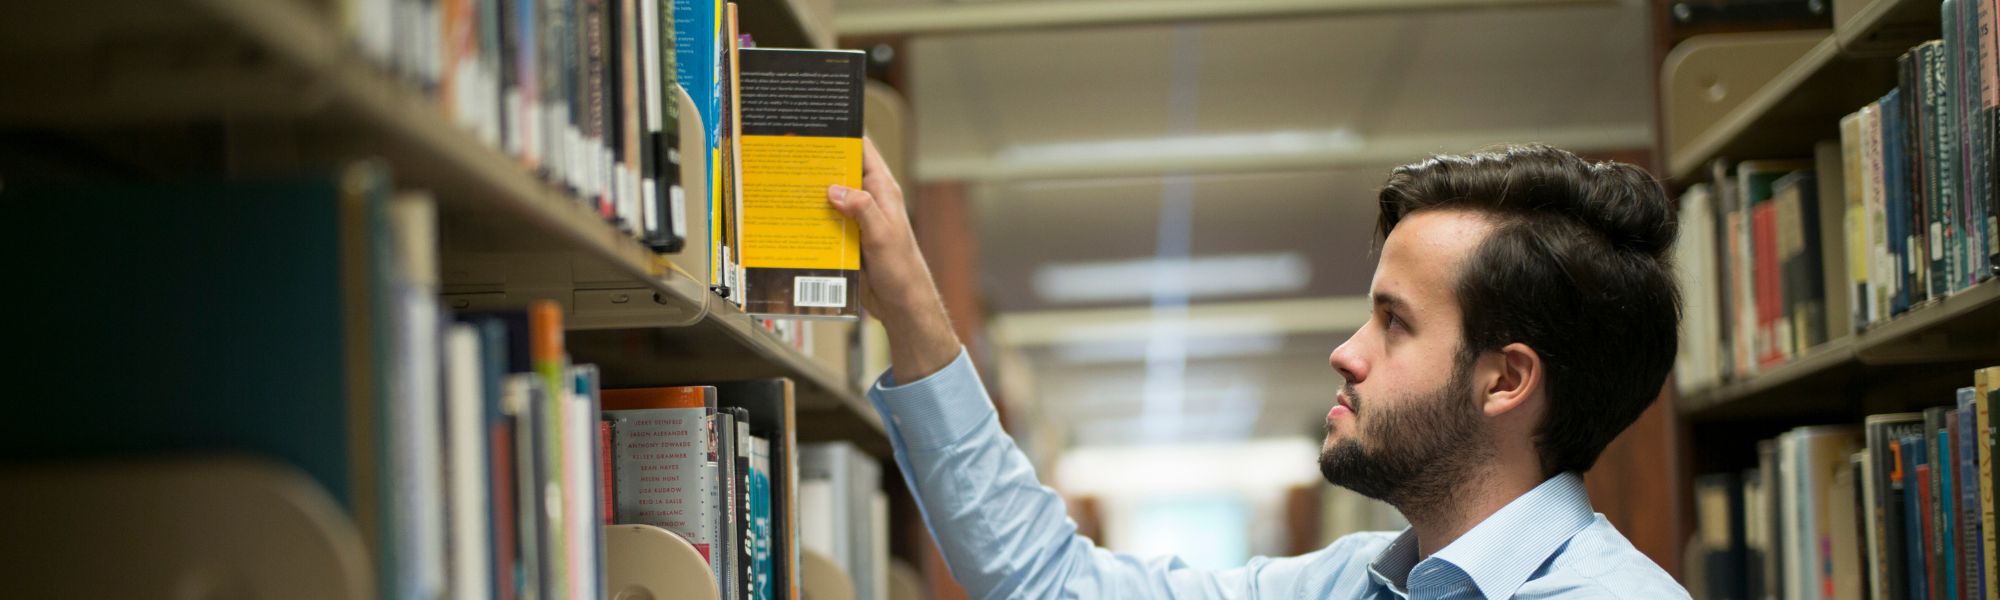 Student grabbing a book from a library shelf.